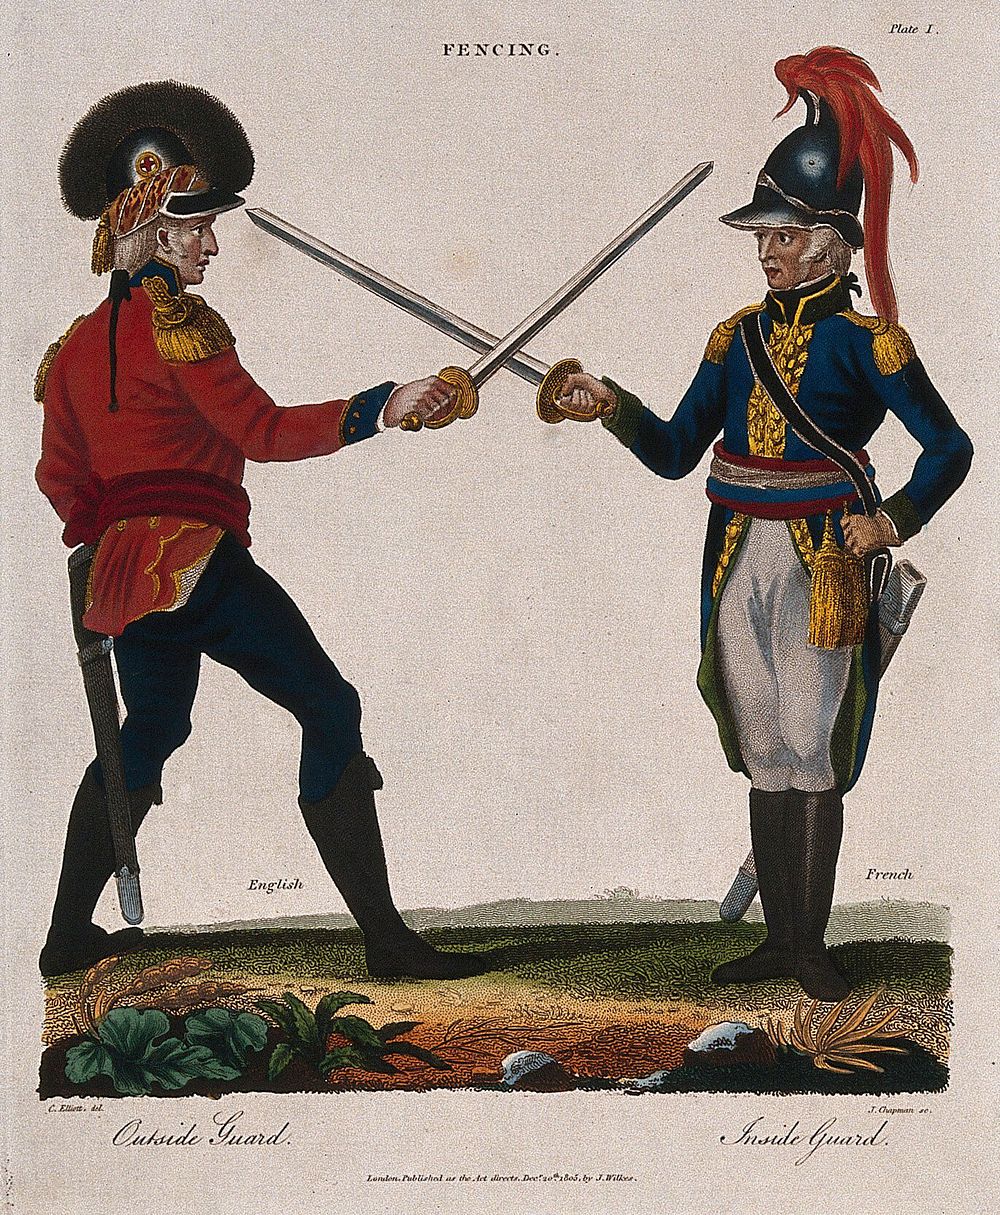 An English soldier facing a French soldier with their swords crossed. Coloured engraving by J. Chapman, 1805, after C.…